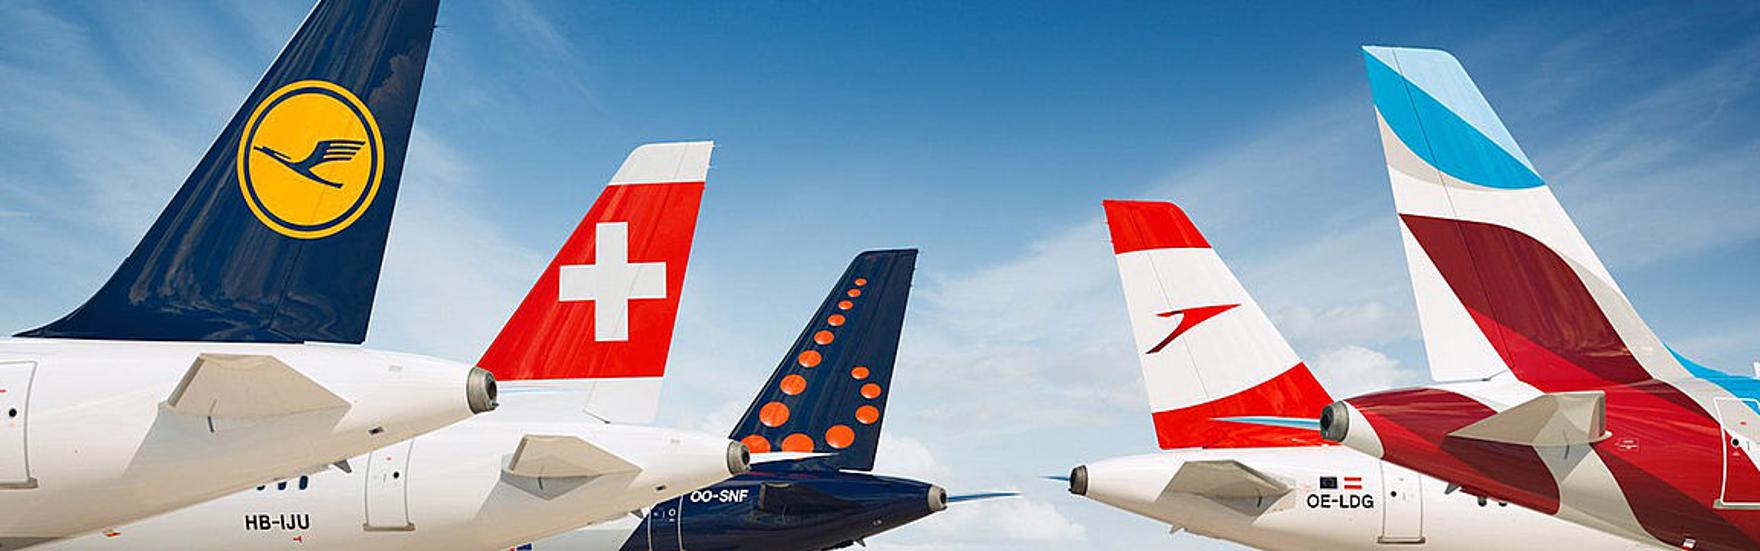 Lufthansa Group To Serve New Holiday Destinations Over Winter